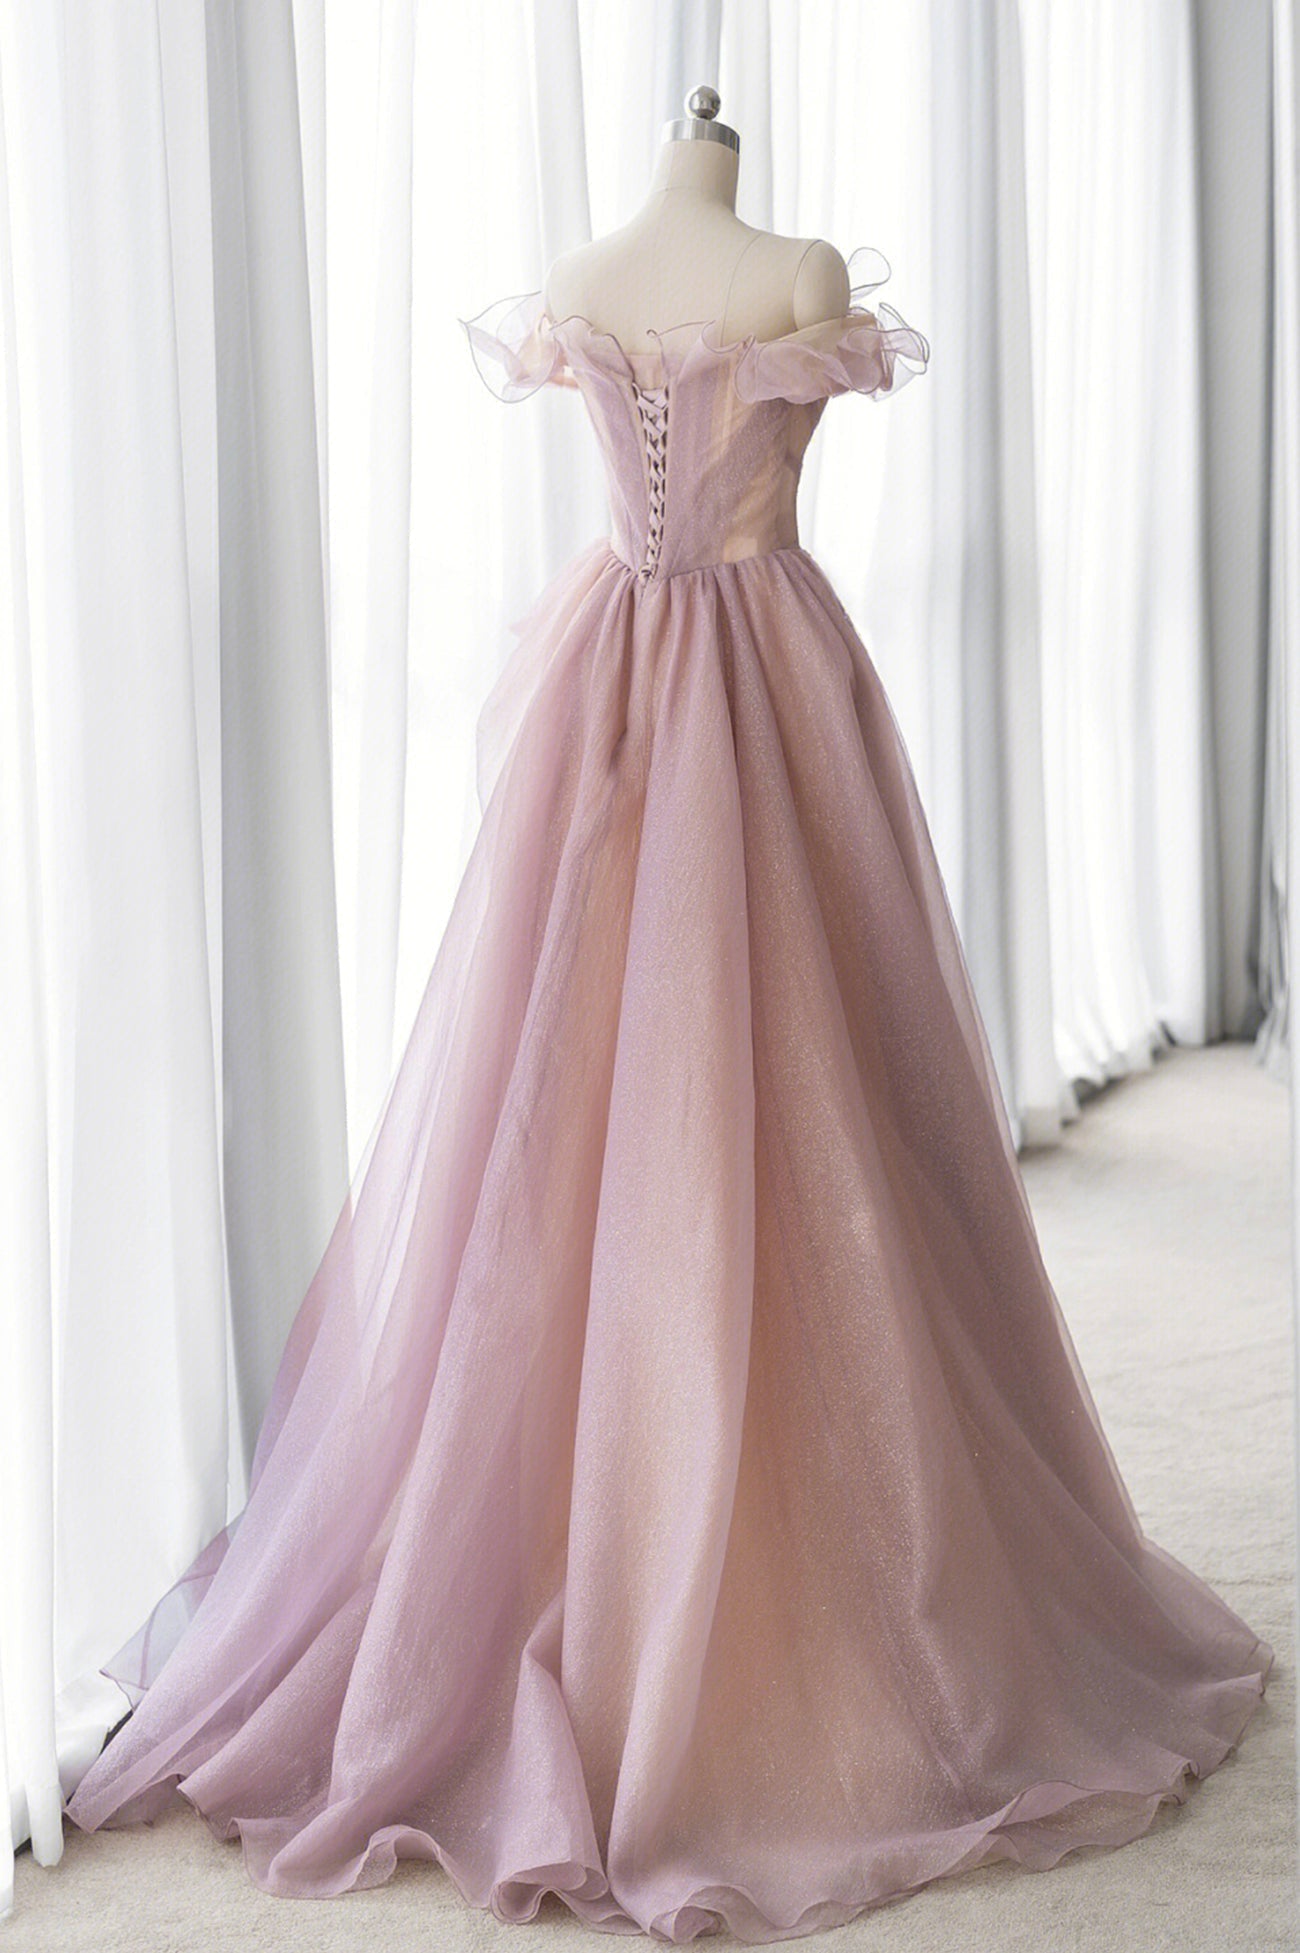 Homecoming Dress With Tulle, Pink Tulle Long A-line Prom Dress, Lovely Off the Shoulder Evening Dress